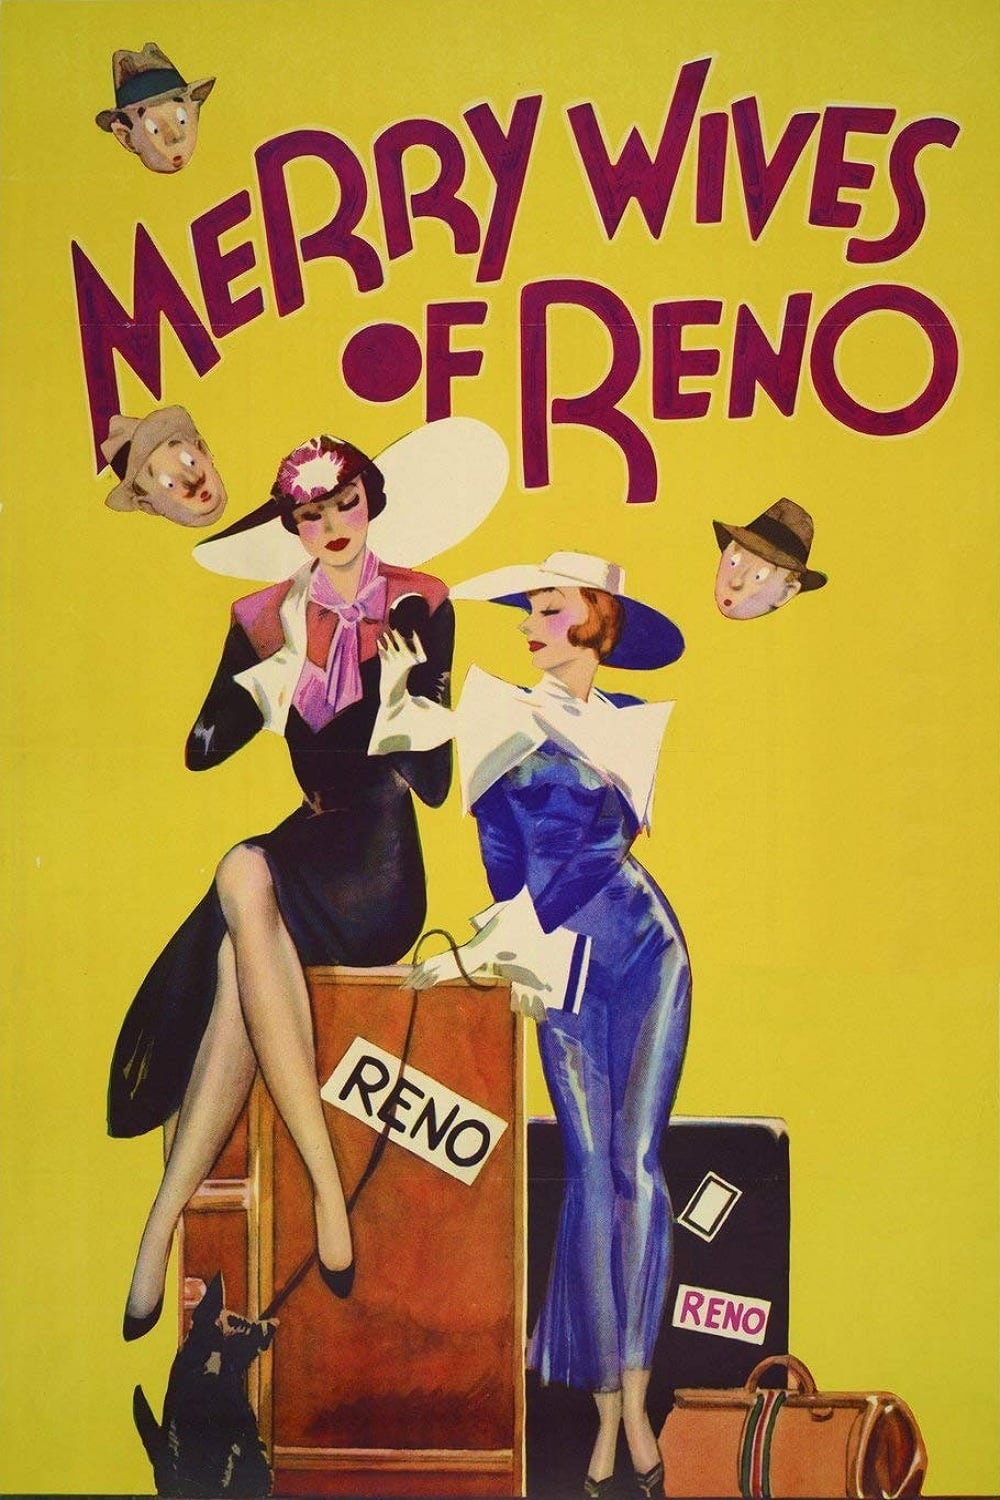 Merry Wives of Reno (1934)